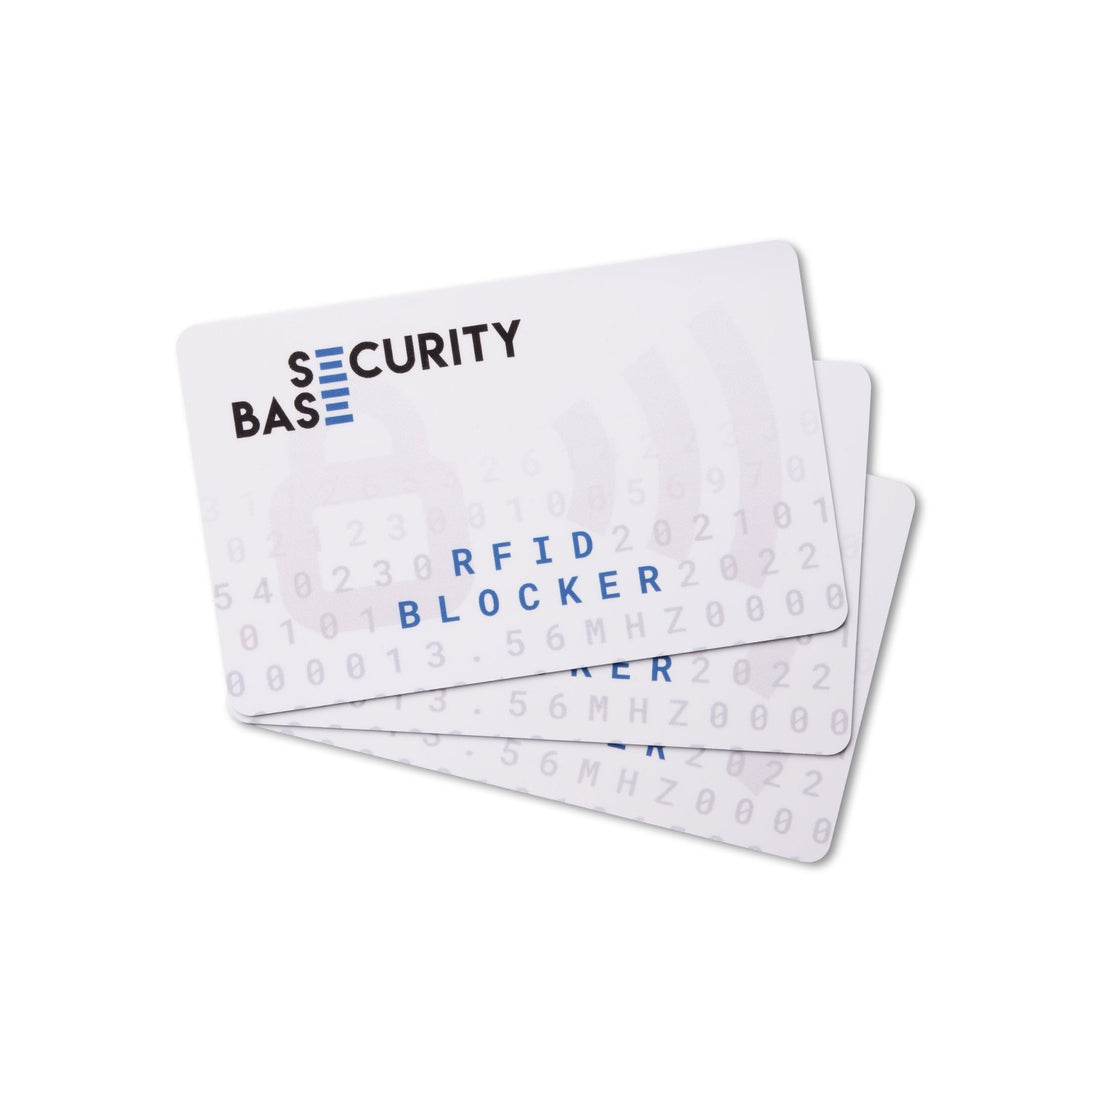 Your guide to RFID Security - RFID Blocker Card to protect your information - Securitybase